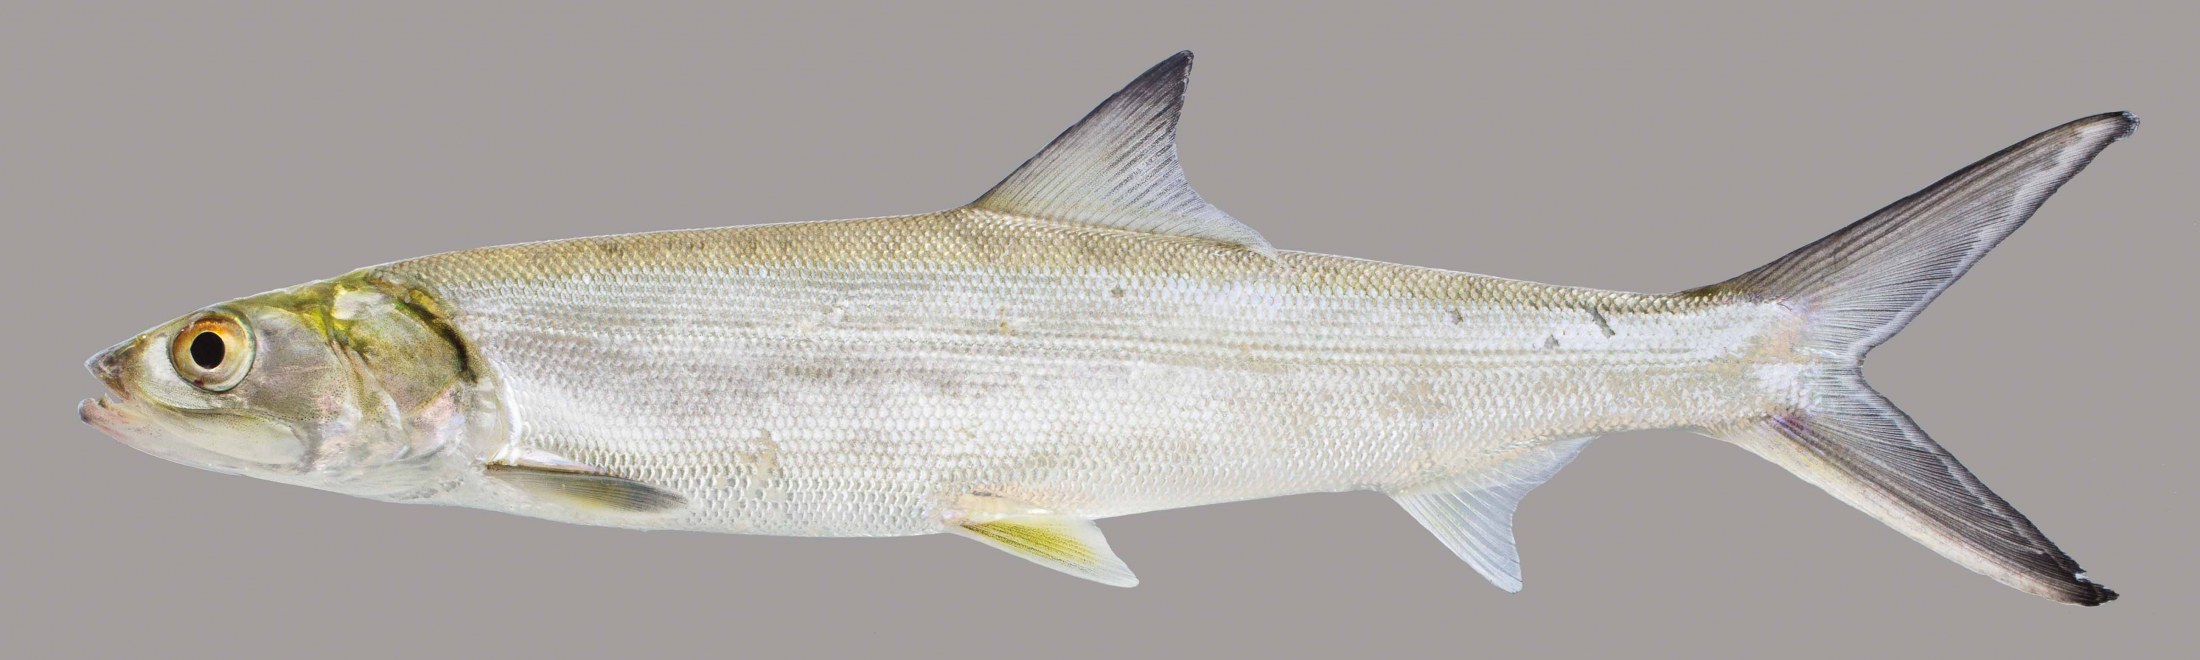 Lateral view of a ladyfish